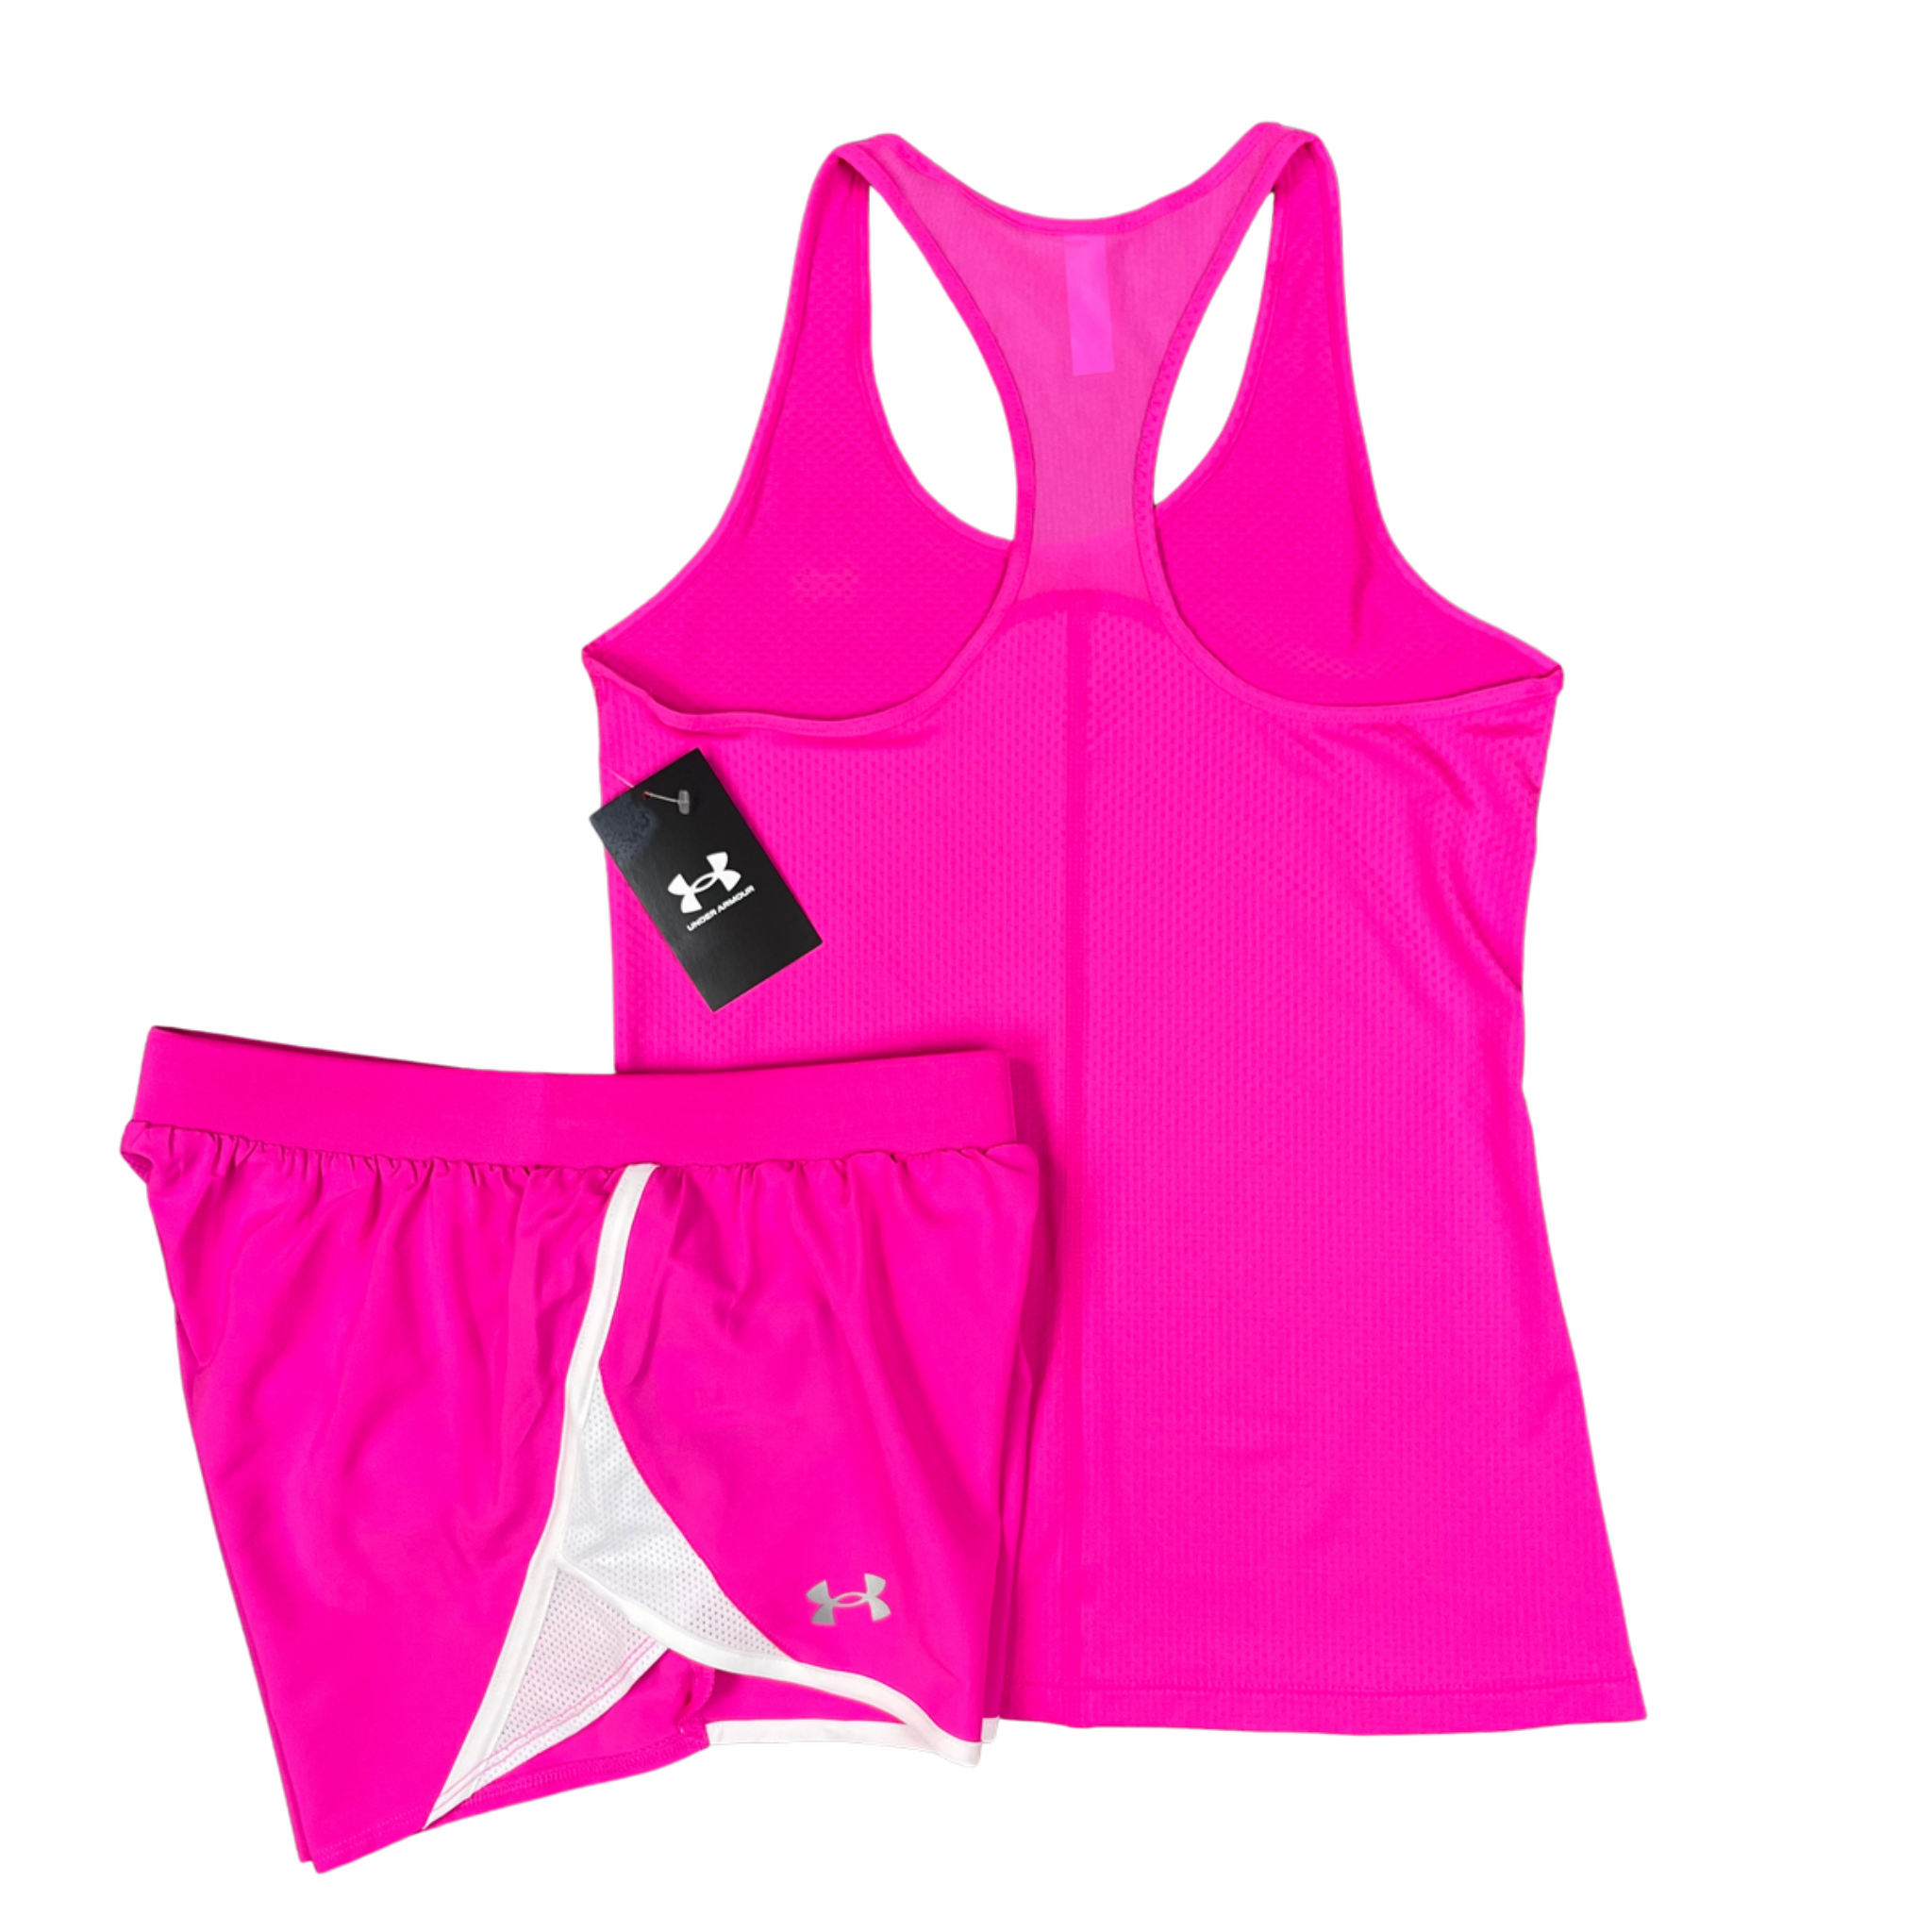 UNDER ARMOUR WOMENS RACER TANK TOP / FLY SHORTS SET - PINK